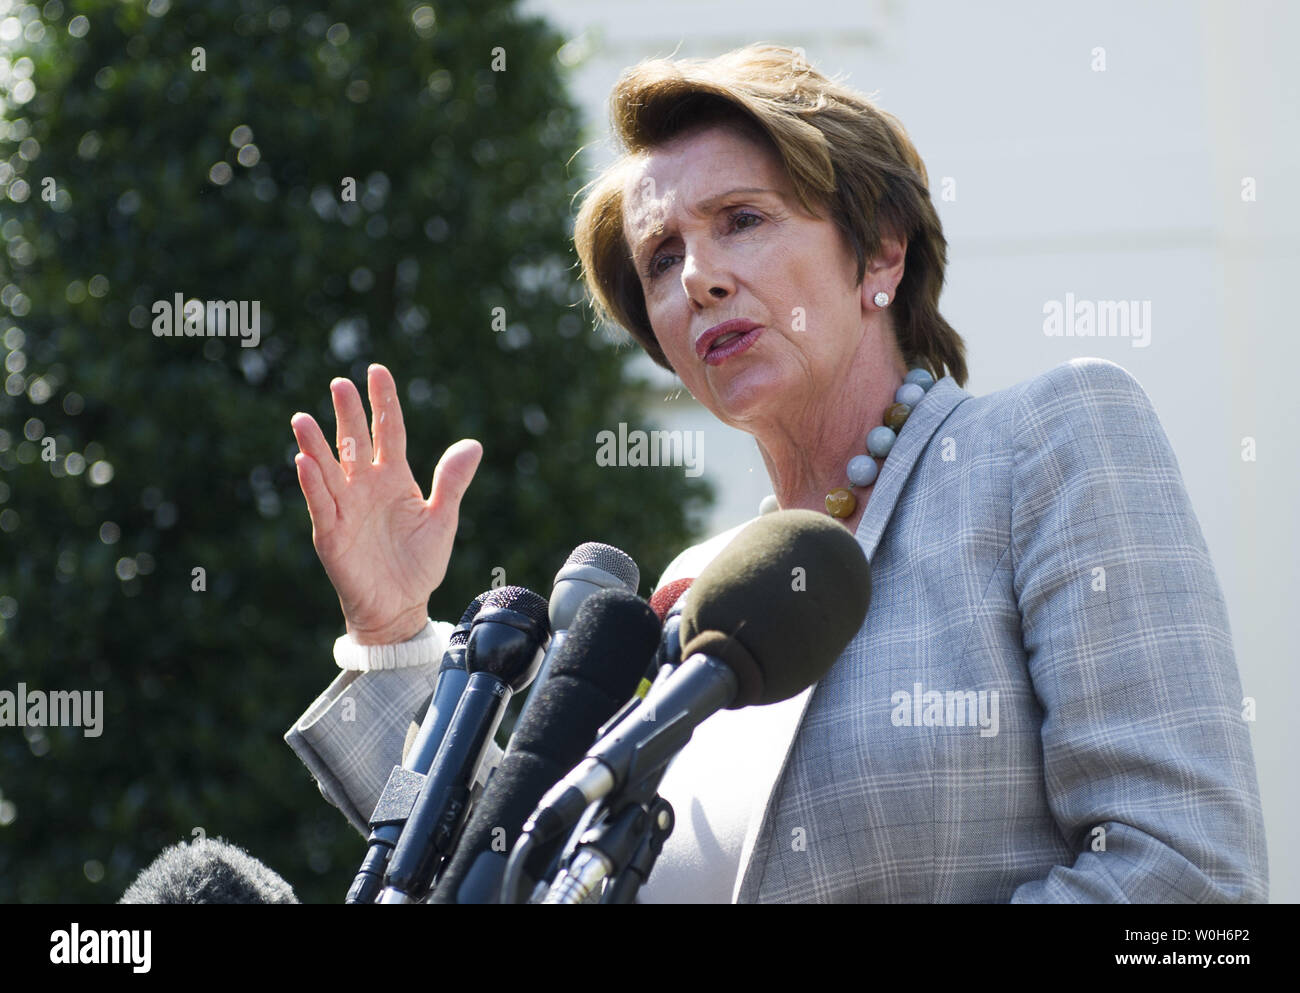 House Democratic Leader Nancy Pelosi (D-CA) speaks to the media following a meeting with President Barack Obama on military action in Syria, at the White House in Washington, D.C. on September 3, 2013. Obama is weighing the use of military force in reaction to the allegations that the Assad regime used chemical weapons on rebels.  UPI/Kevin Dietsch Stock Photo